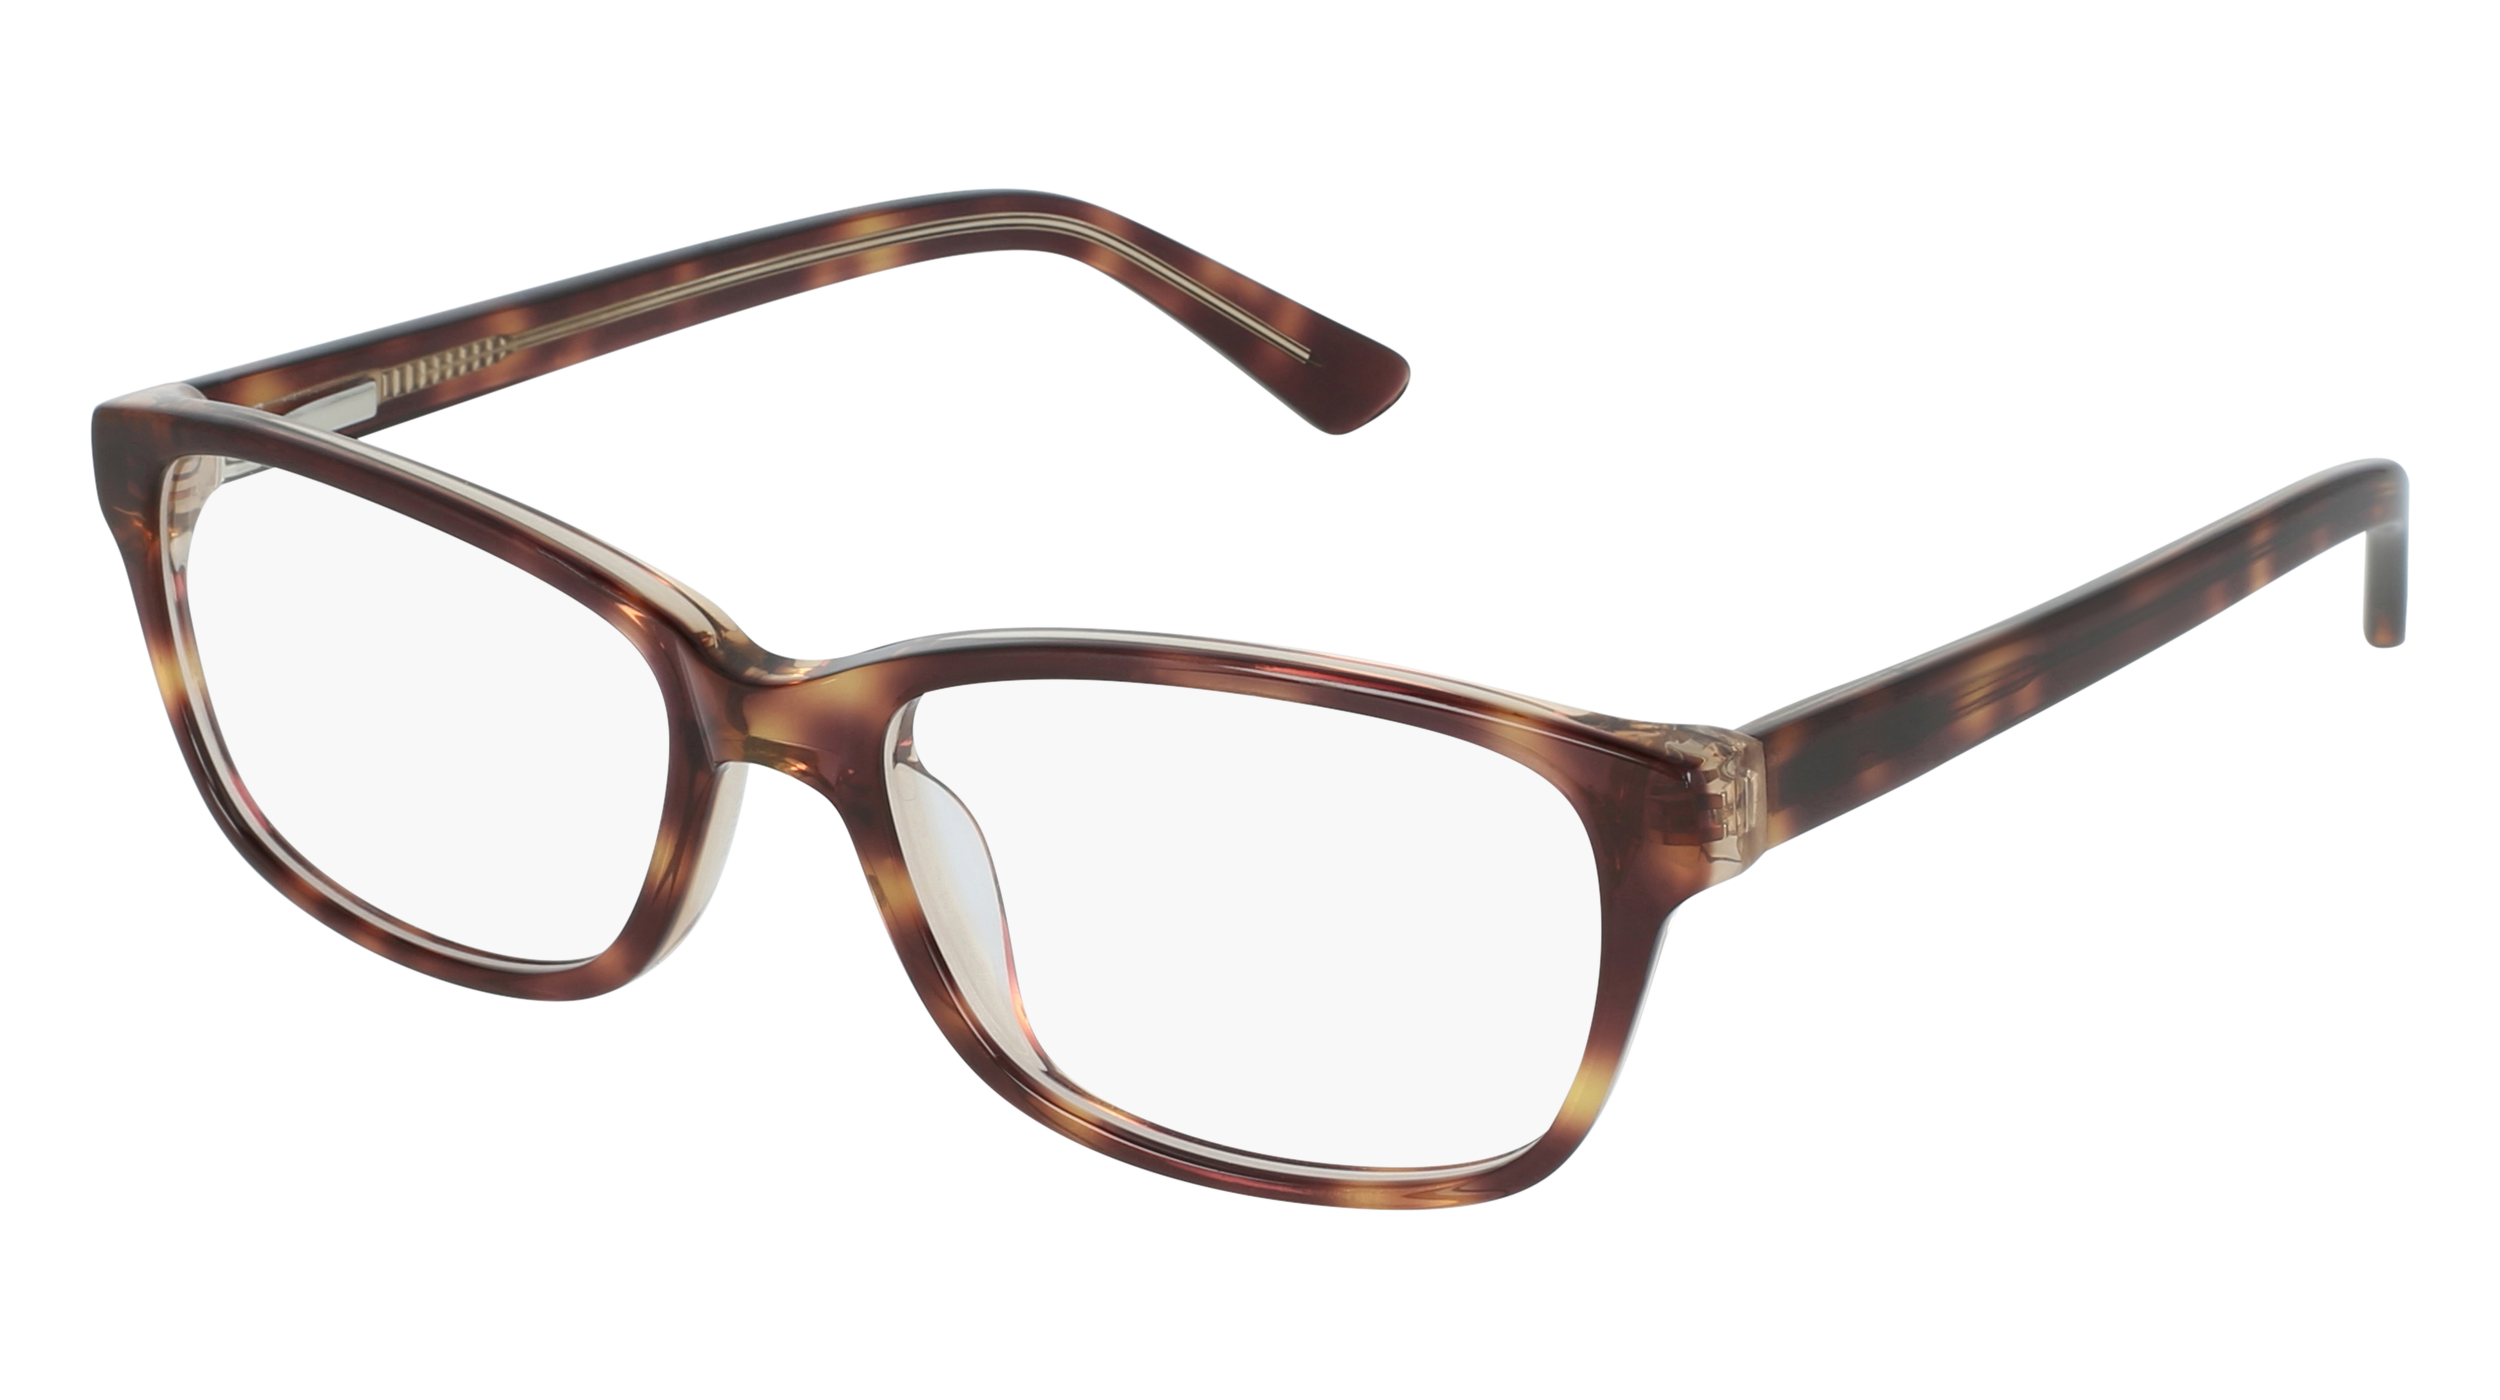 a AN 177 women's eyeglasses (from the side)